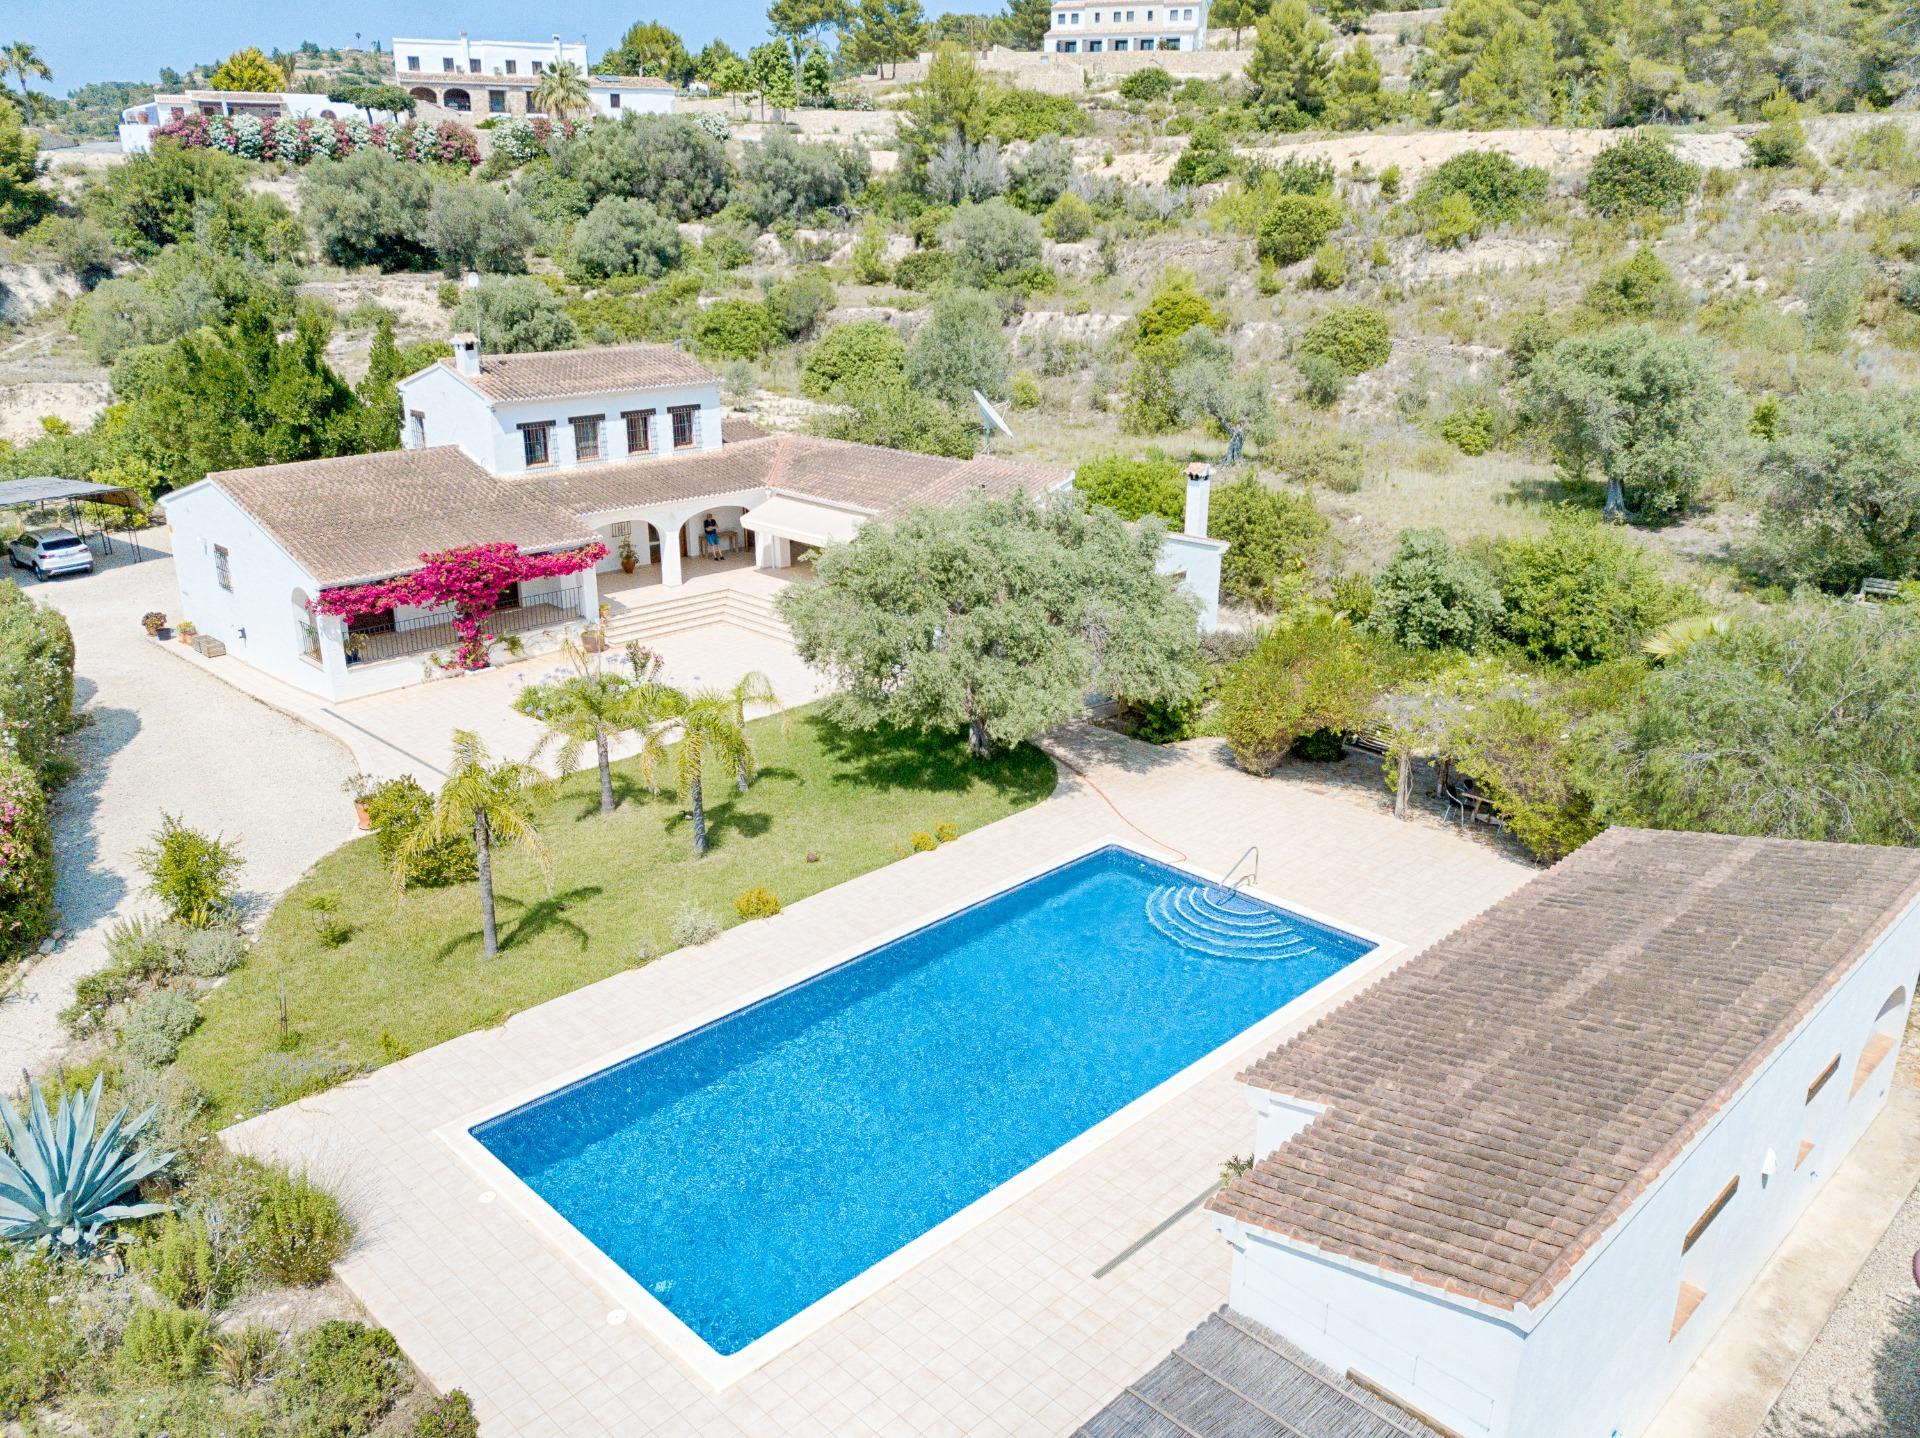 FANTASTIC FINCA WITH BEAUTIFUL VIEWS AND TRANQUILITY IN BENISSA